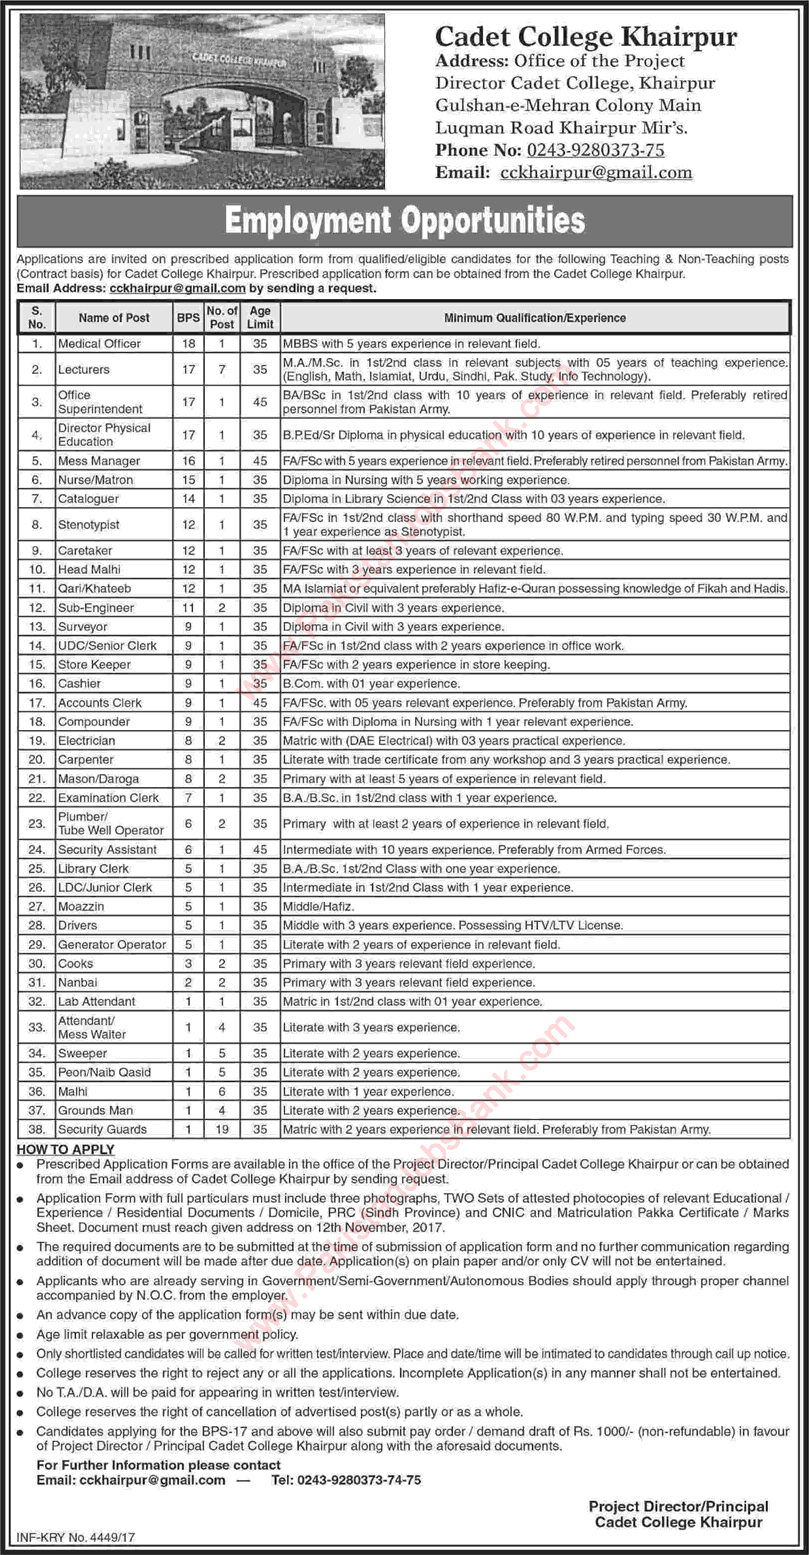 Cadet College Khairpur Jobs 2017 October Lecturers, Sub Engineers, Naib Qasid, Security Guards & Others Latest